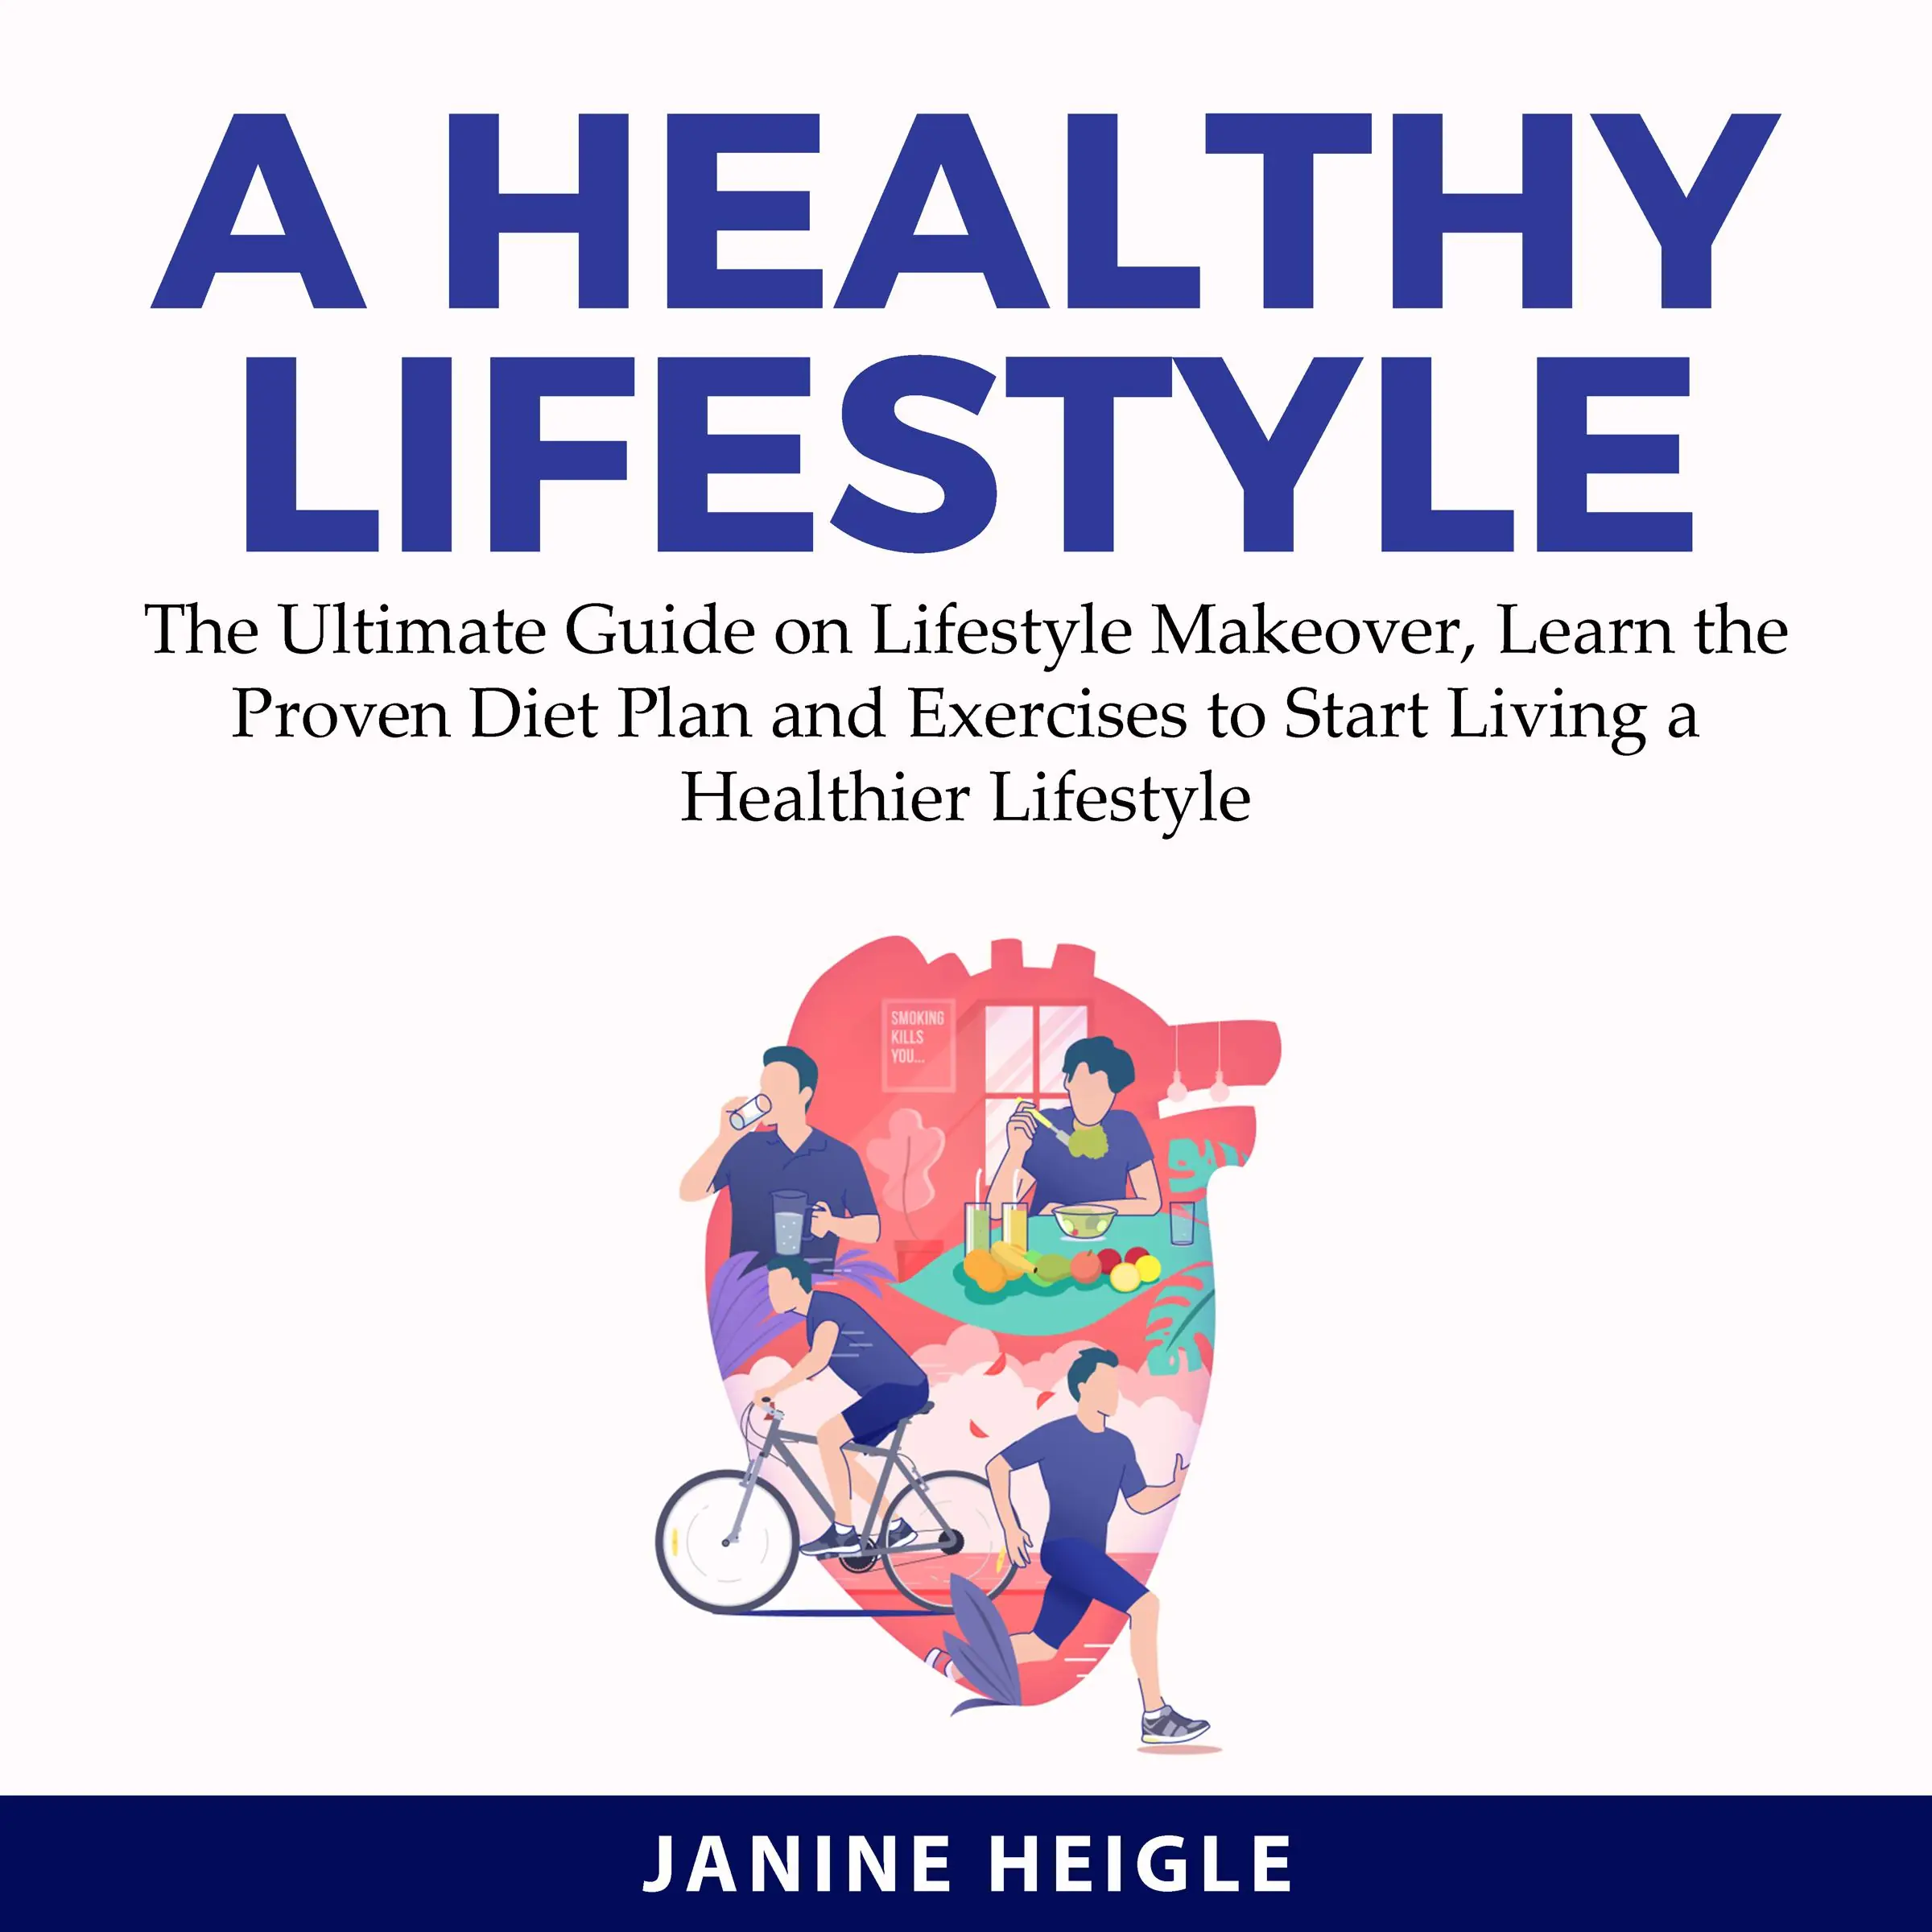 A Healthy Lifestyle: The Ultimate Guide on Lifestyle Makeover, Learn the Proven Diet Plan and Exercises to Start Living a Healthier Lifestyle by Janine Heigle Audiobook